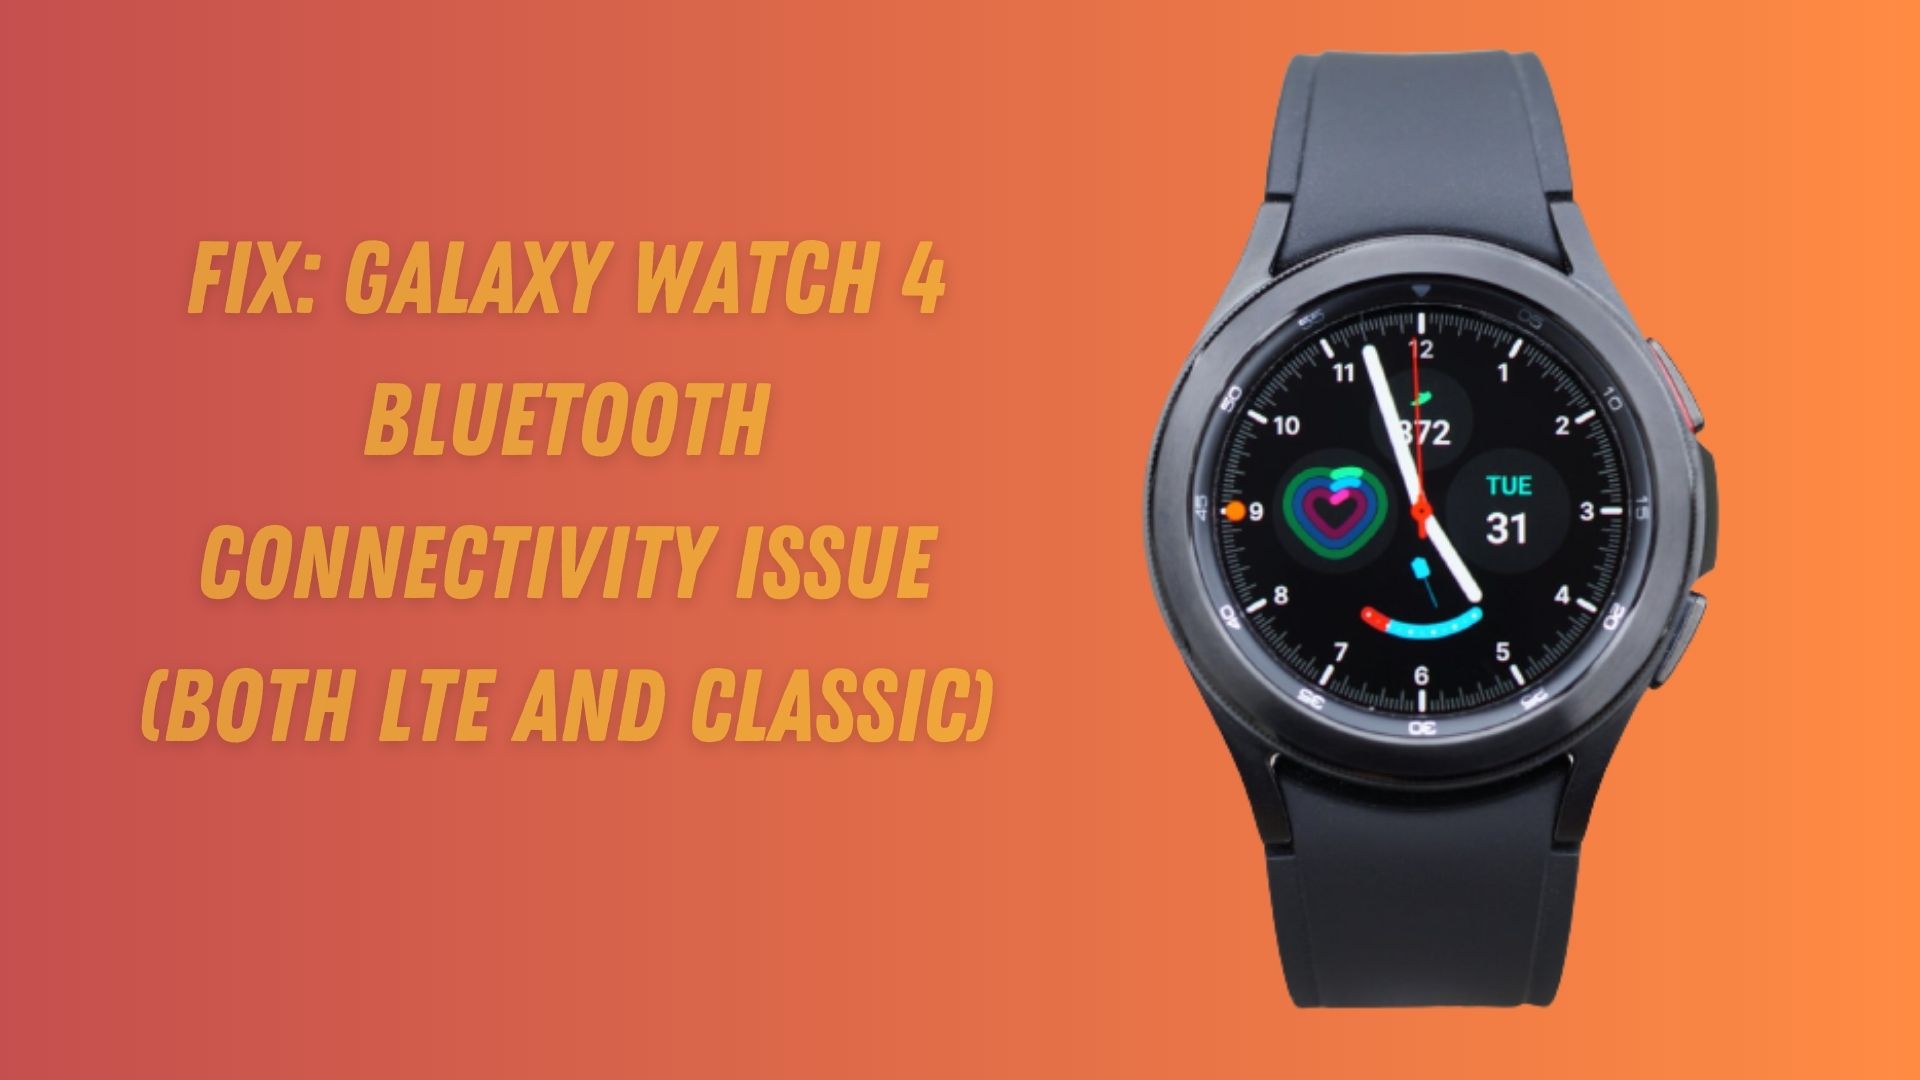 Fix: Galaxy Watch 4 Bluetooth Connectivity Issue (Both LTE and Classic)